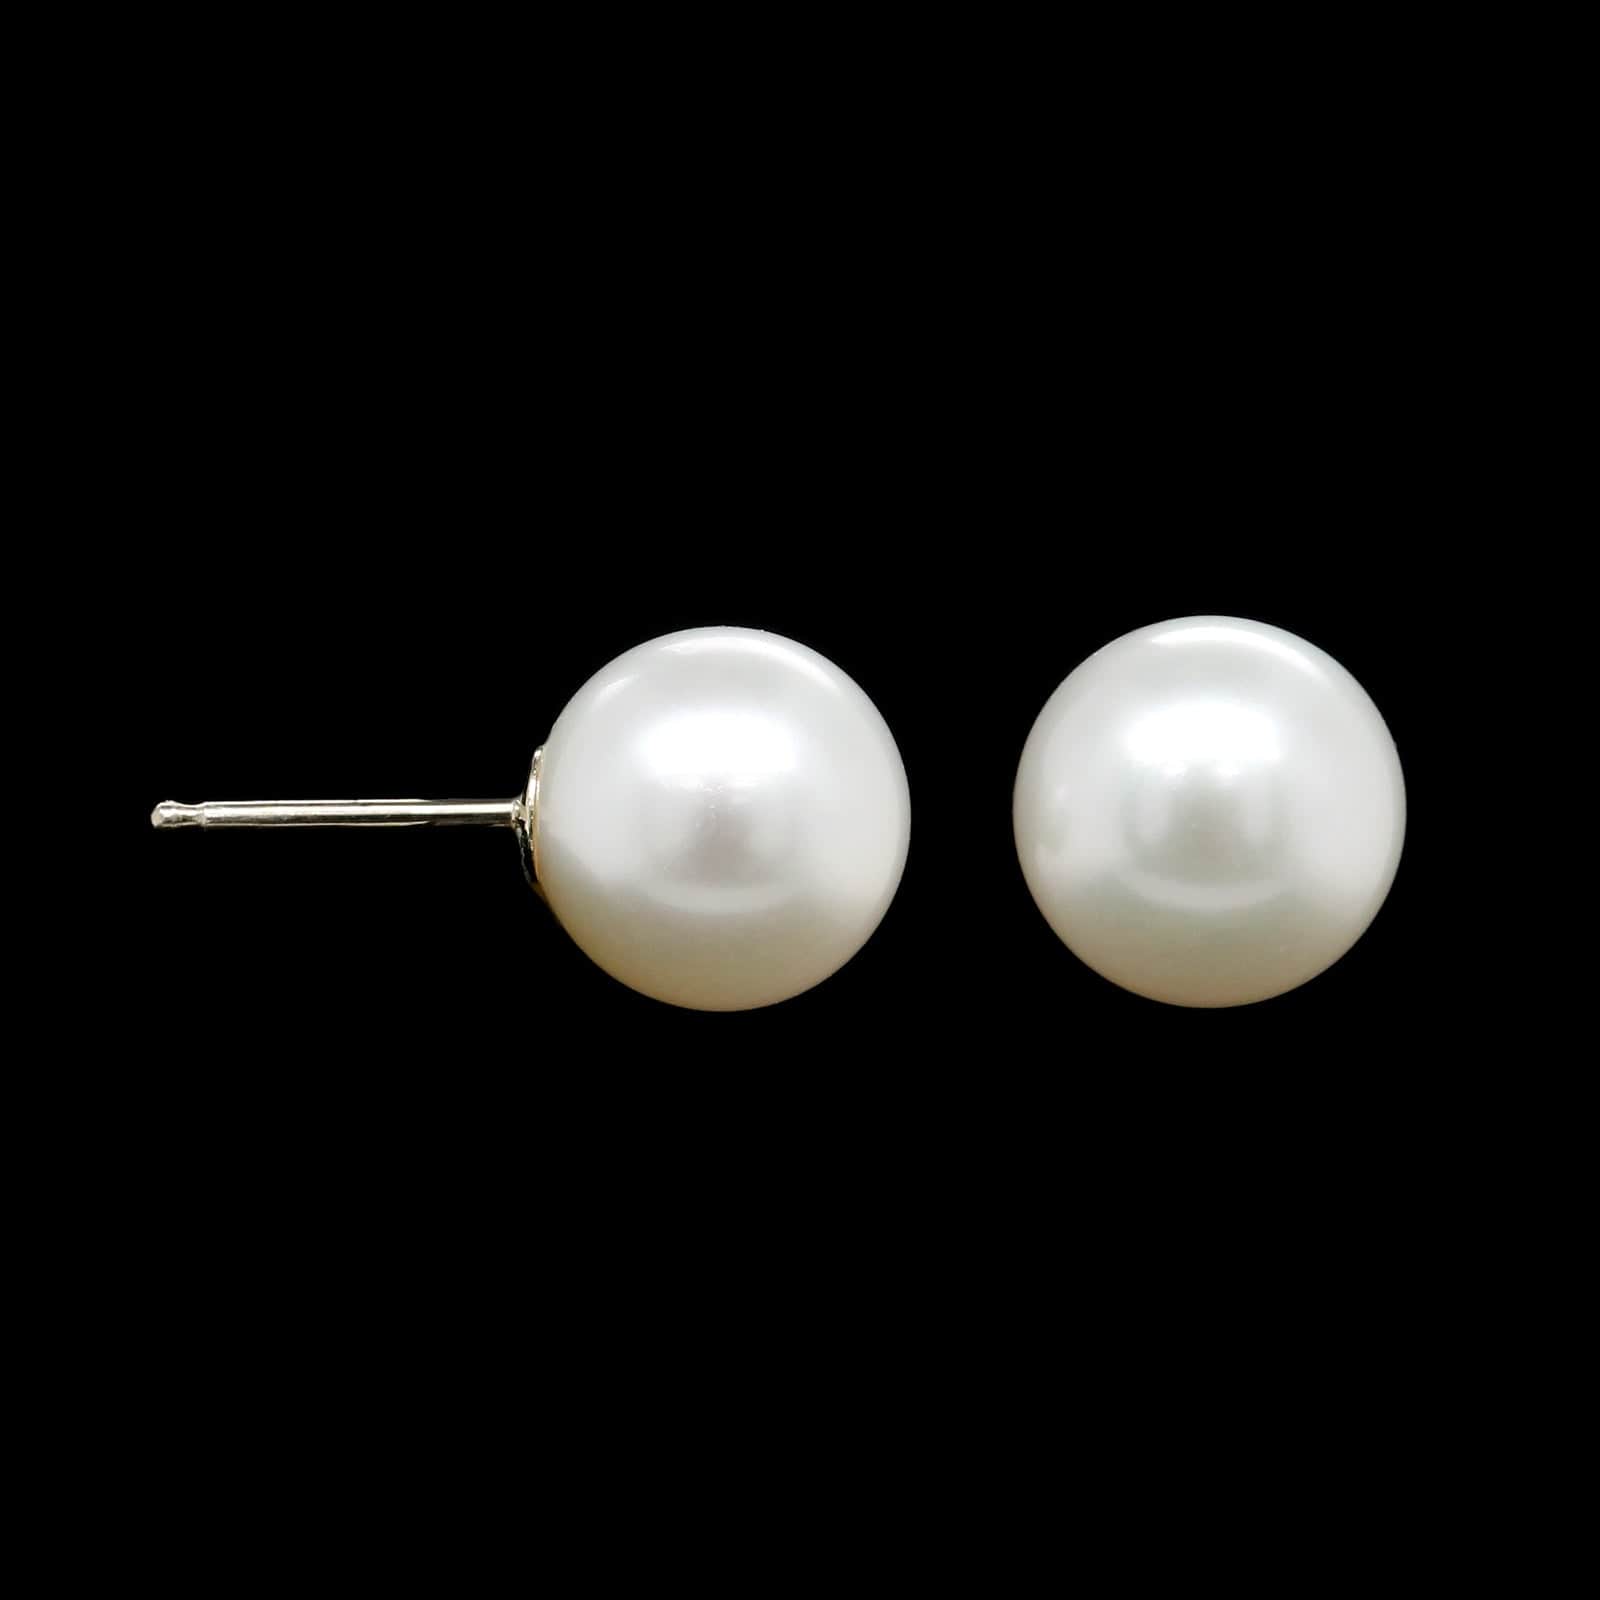 Ziegfeld Collection Sterling Silver Drop Earrings with Pearls